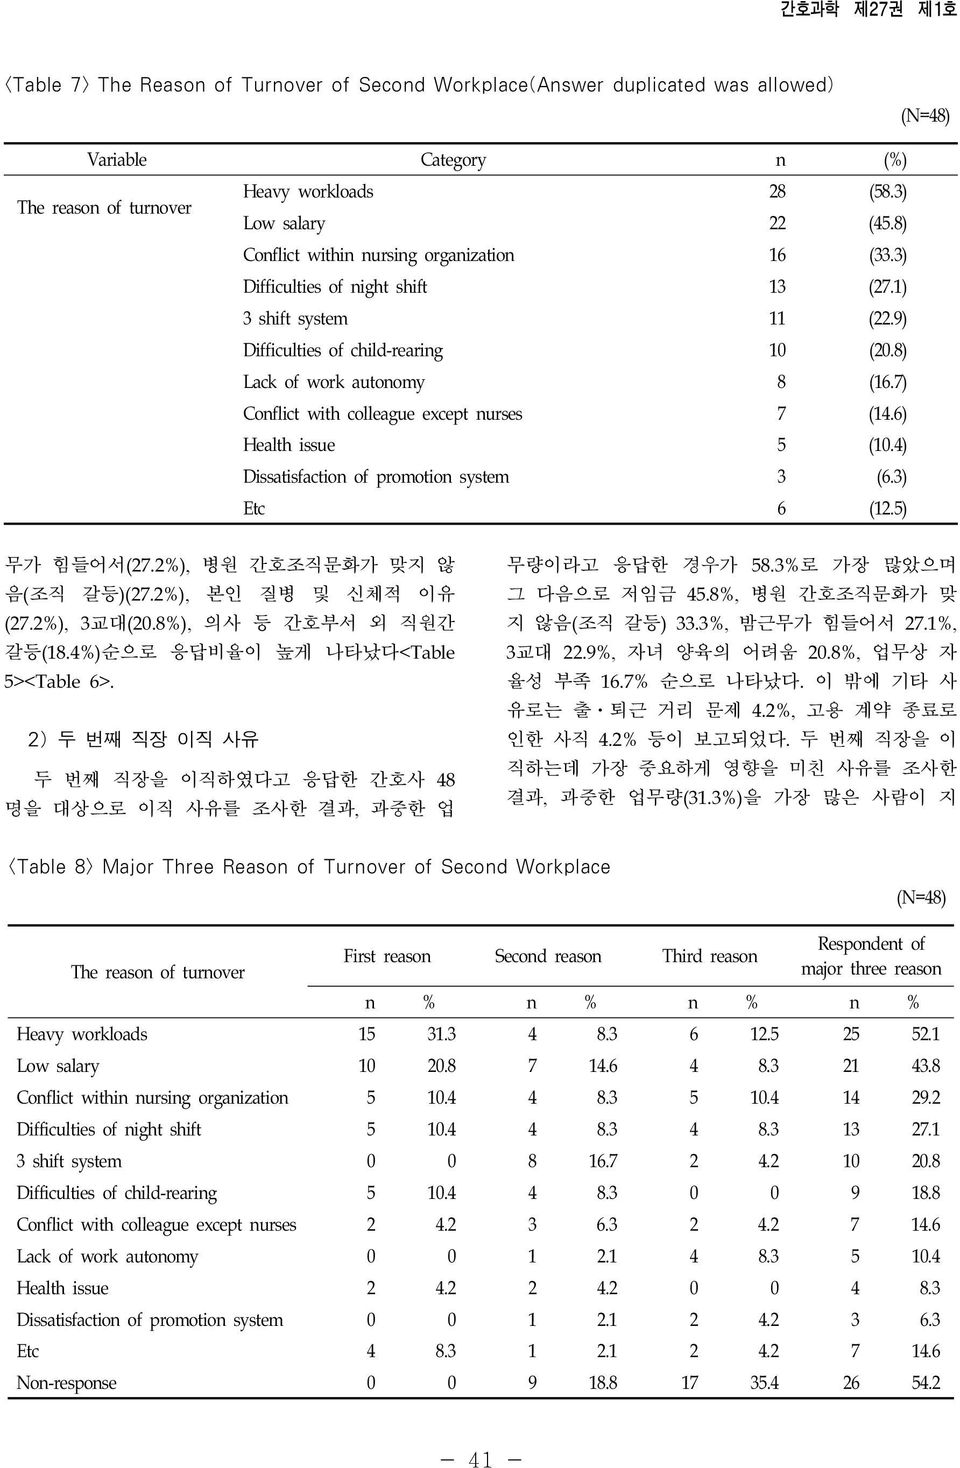 7) Conflict with colleague except nurses 7 (14.6) Health issue 5 (10.4) Dissatisfaction of promotion system 3 (6.3) Etc 6 (12.5) 무가 힘들어서(27.2%), 병원 간호조직문화가 맞지 않 음(조직 갈등)(27.2%), 본인 질병 및 신체적 이유 (27.